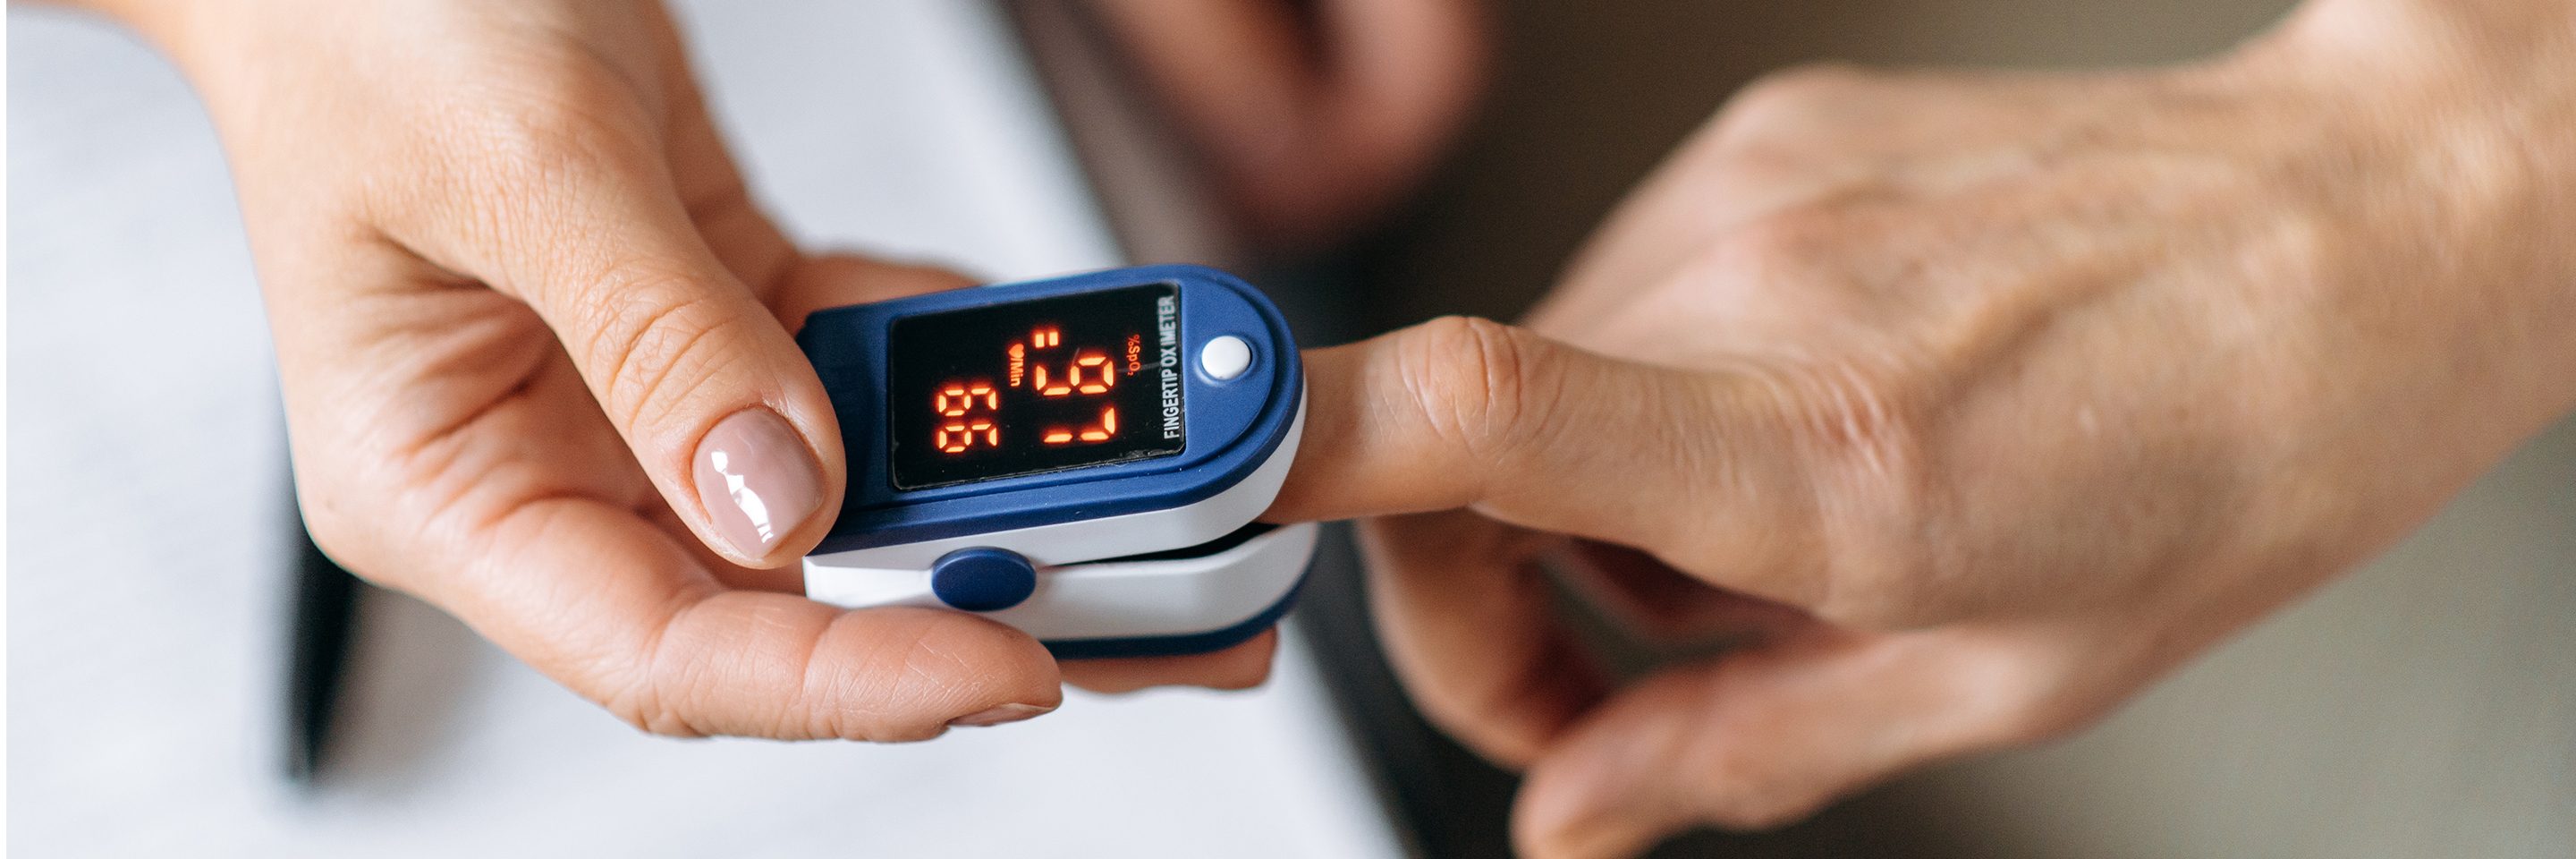 How to use oximeter